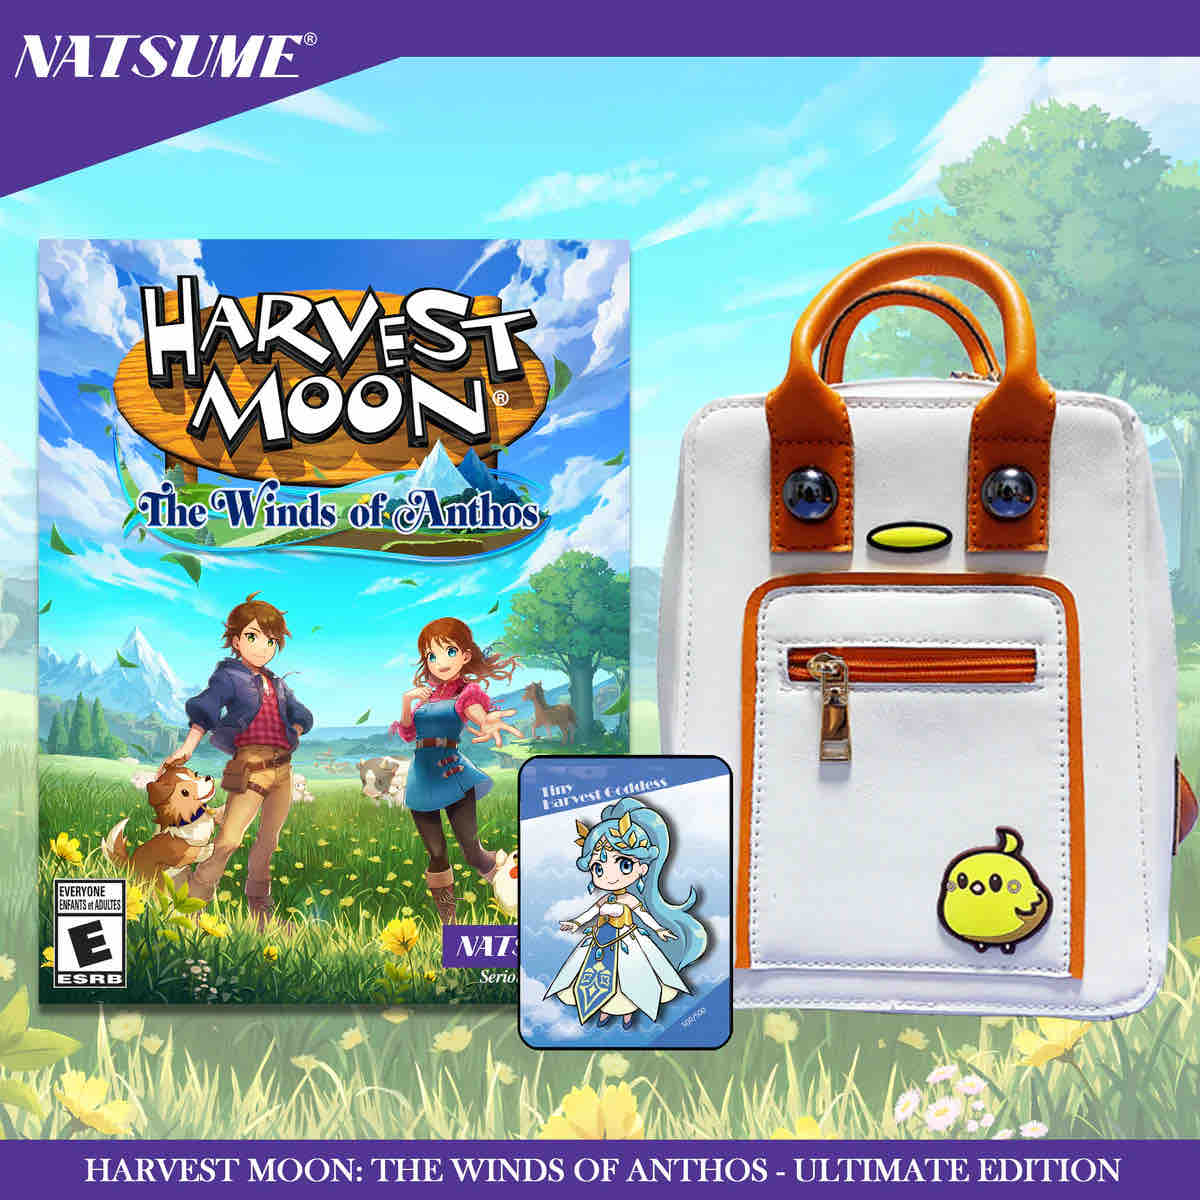 Peeps won’t be able to stop chicken out your cute chicken backpack! This Harvest Moon: The Winds of Anthos bundle is currently 32% off! See all the details here: natsumestore.com/collections/ha…